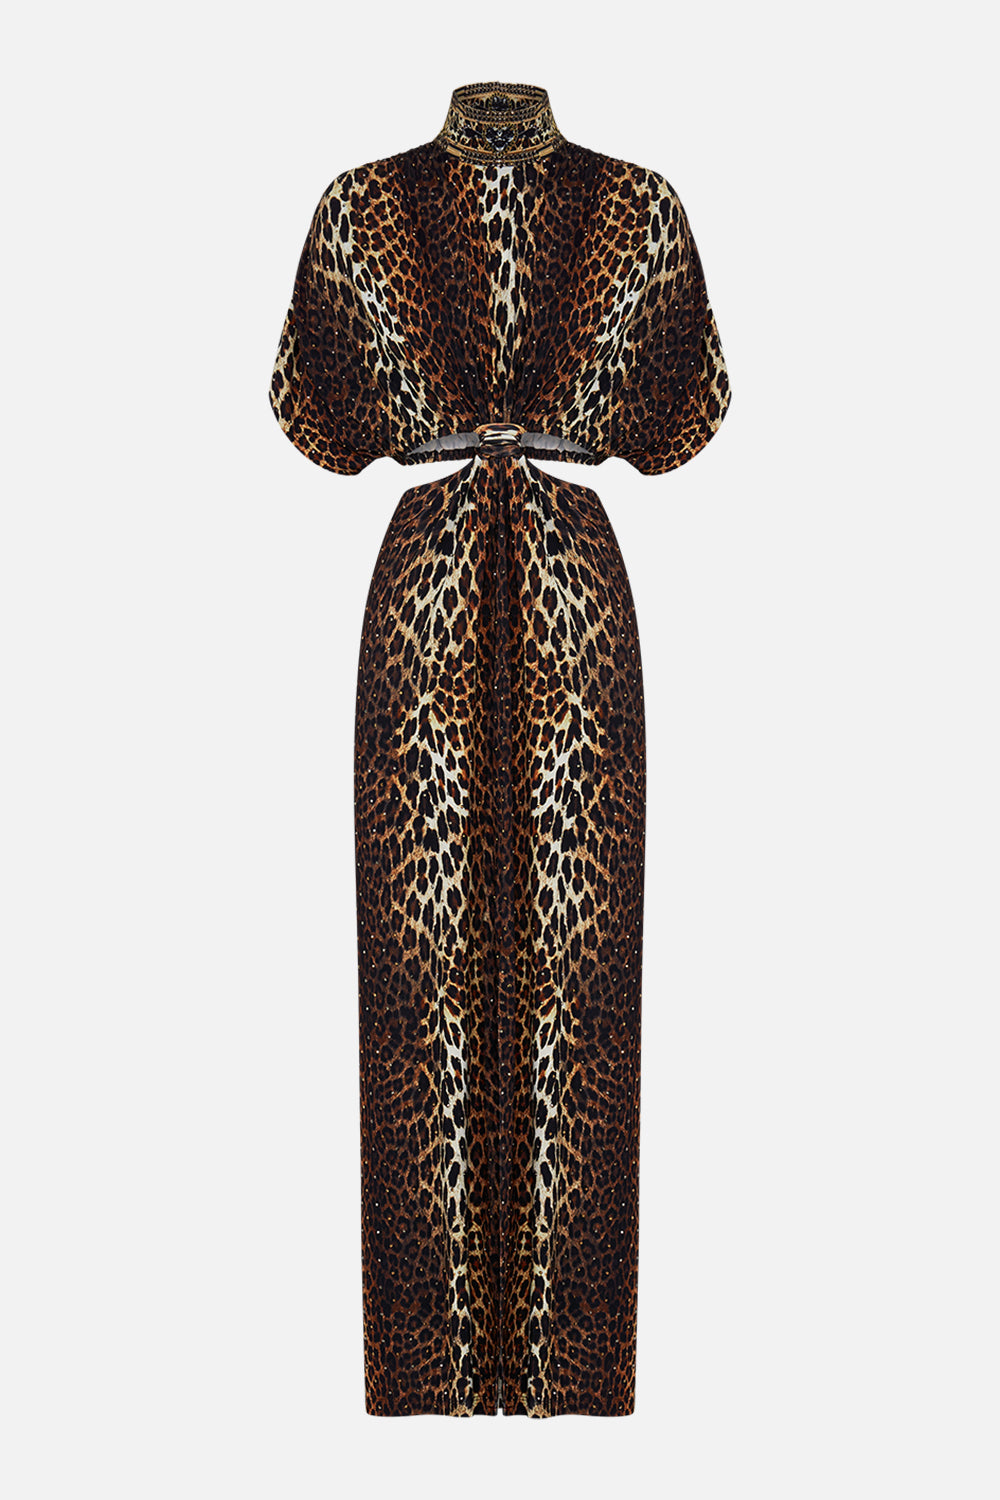 CAMILLA leopard high neck twist cut out jersey dress In Amsterglam print. 